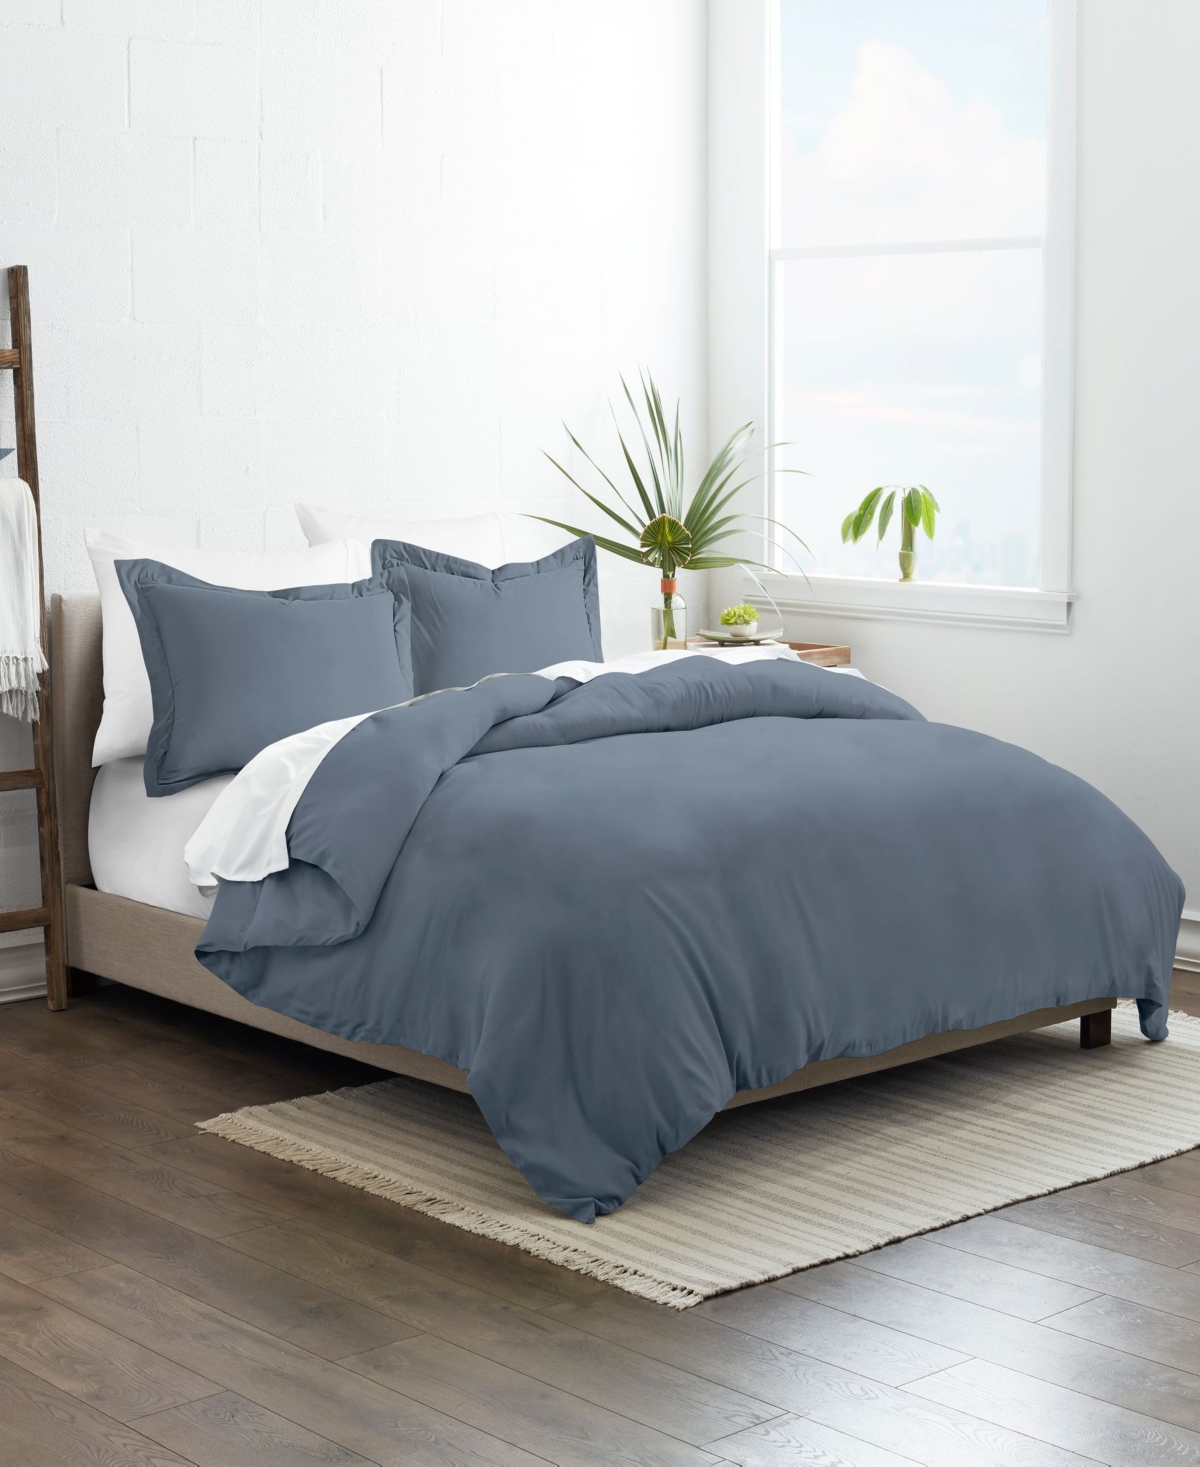 Ienjoy Home Dynamically Dashing Duvet Cover Set By The Home Collection, Twin Bedding In Stone